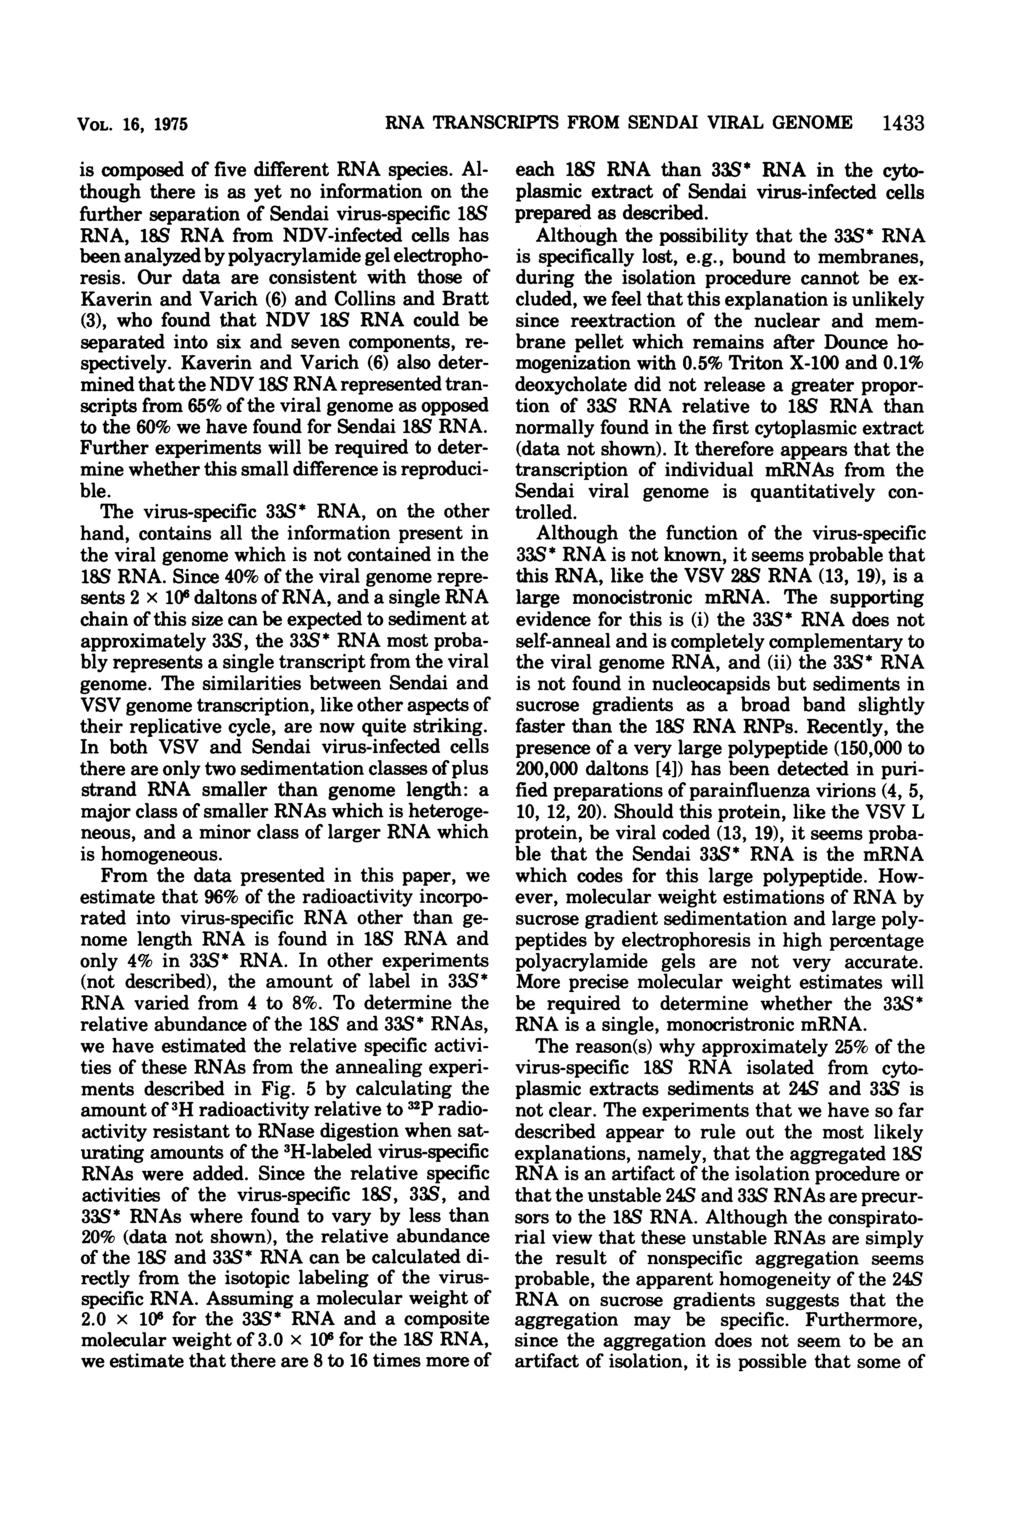 VOL. 16, 1975 is composed of five different RNA species.